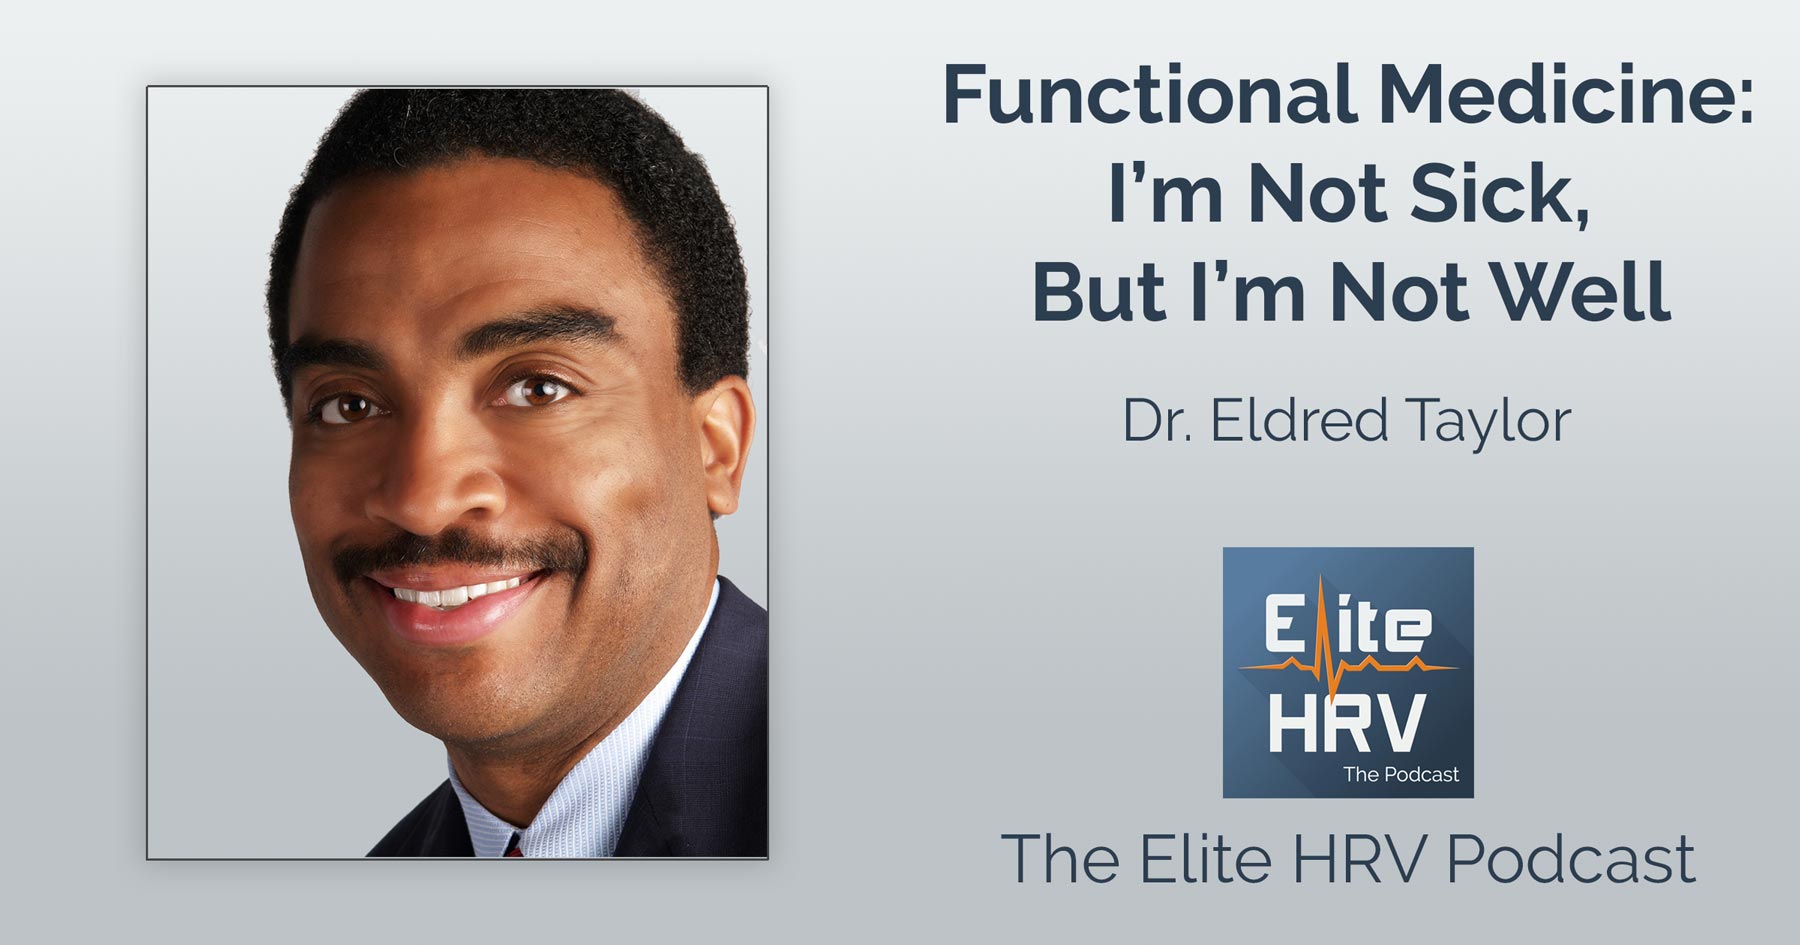 Functional Medicine With Dr. Eldred Taylor